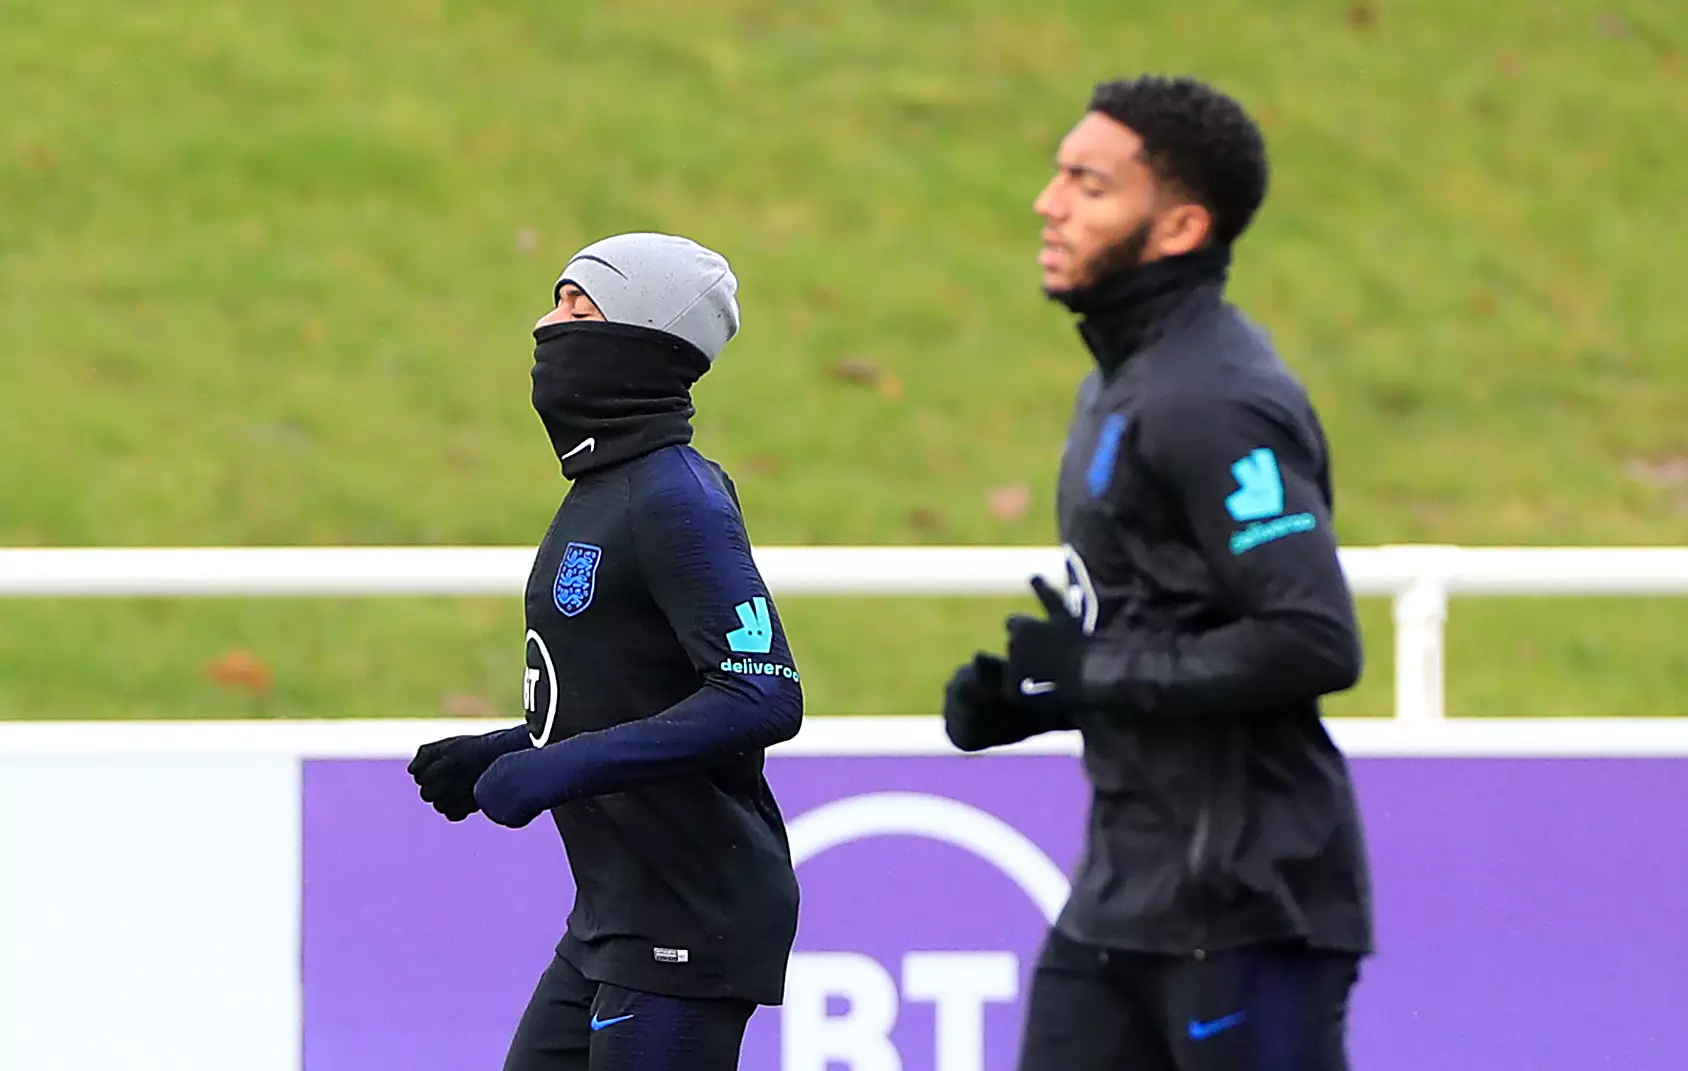 Raheem Sterling and Joe Gomez train at St George's Park after their bust-up